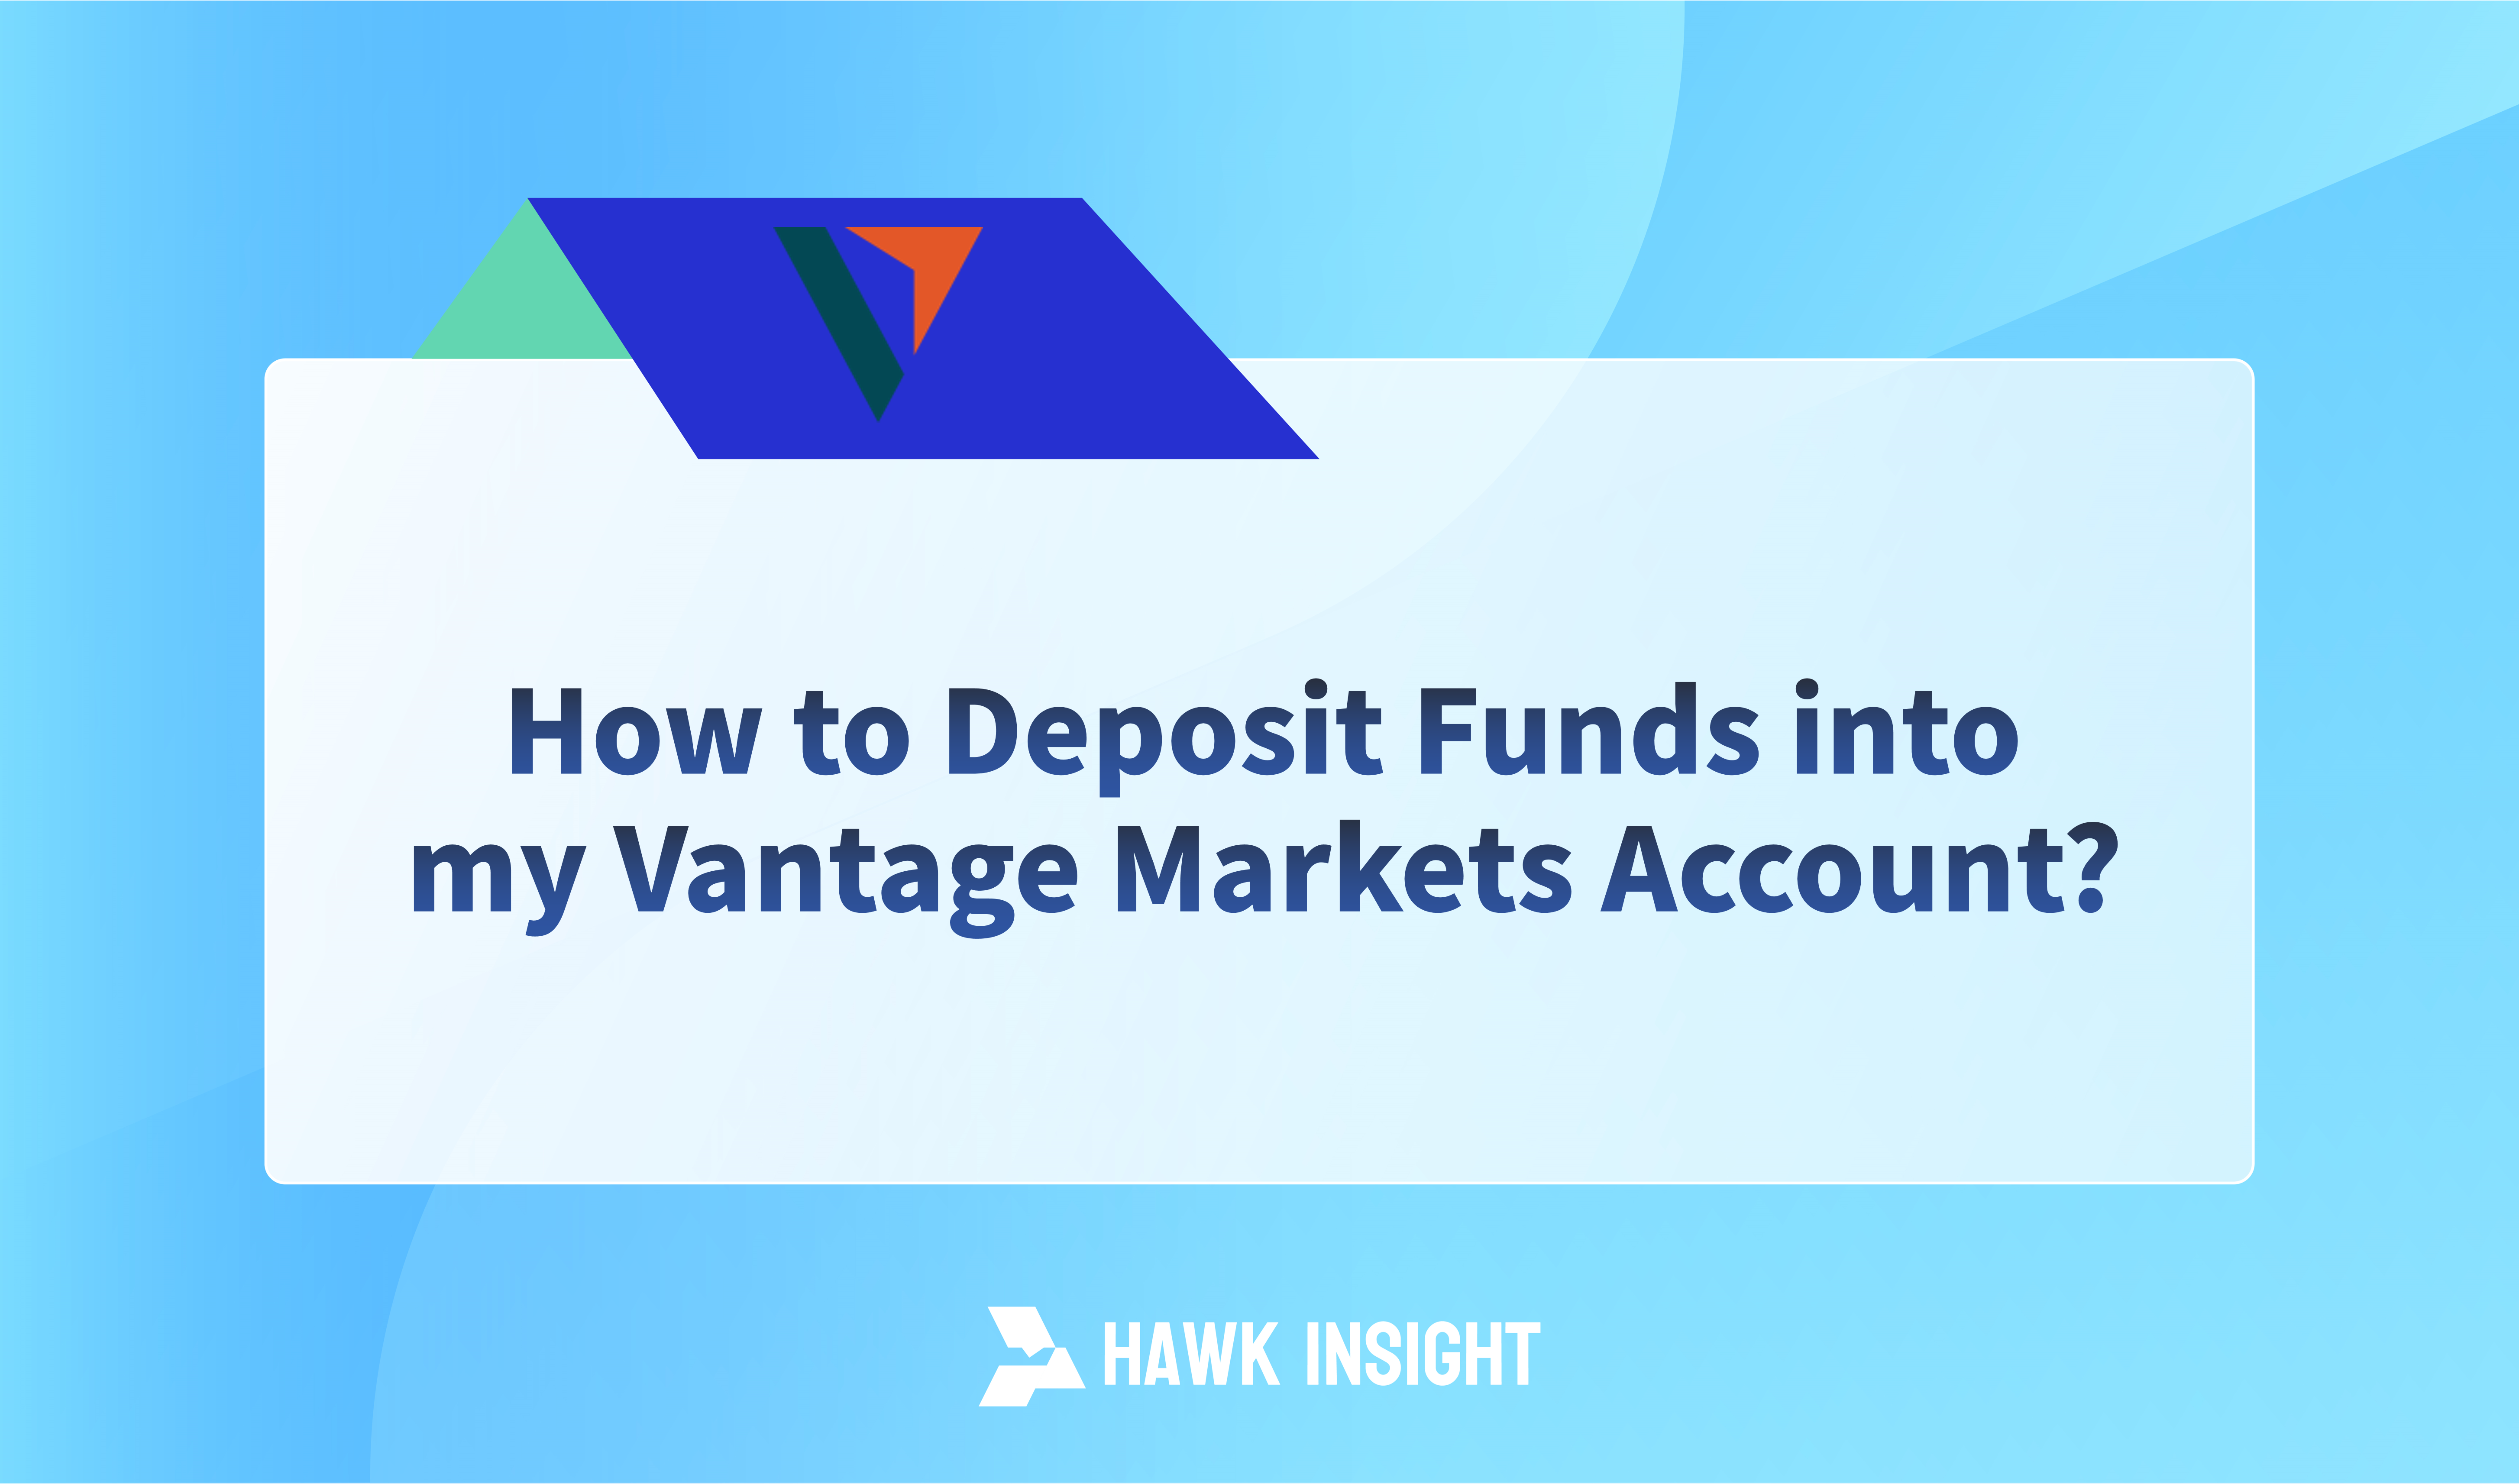 How to Deposit Funds into Vantage Markets Account?